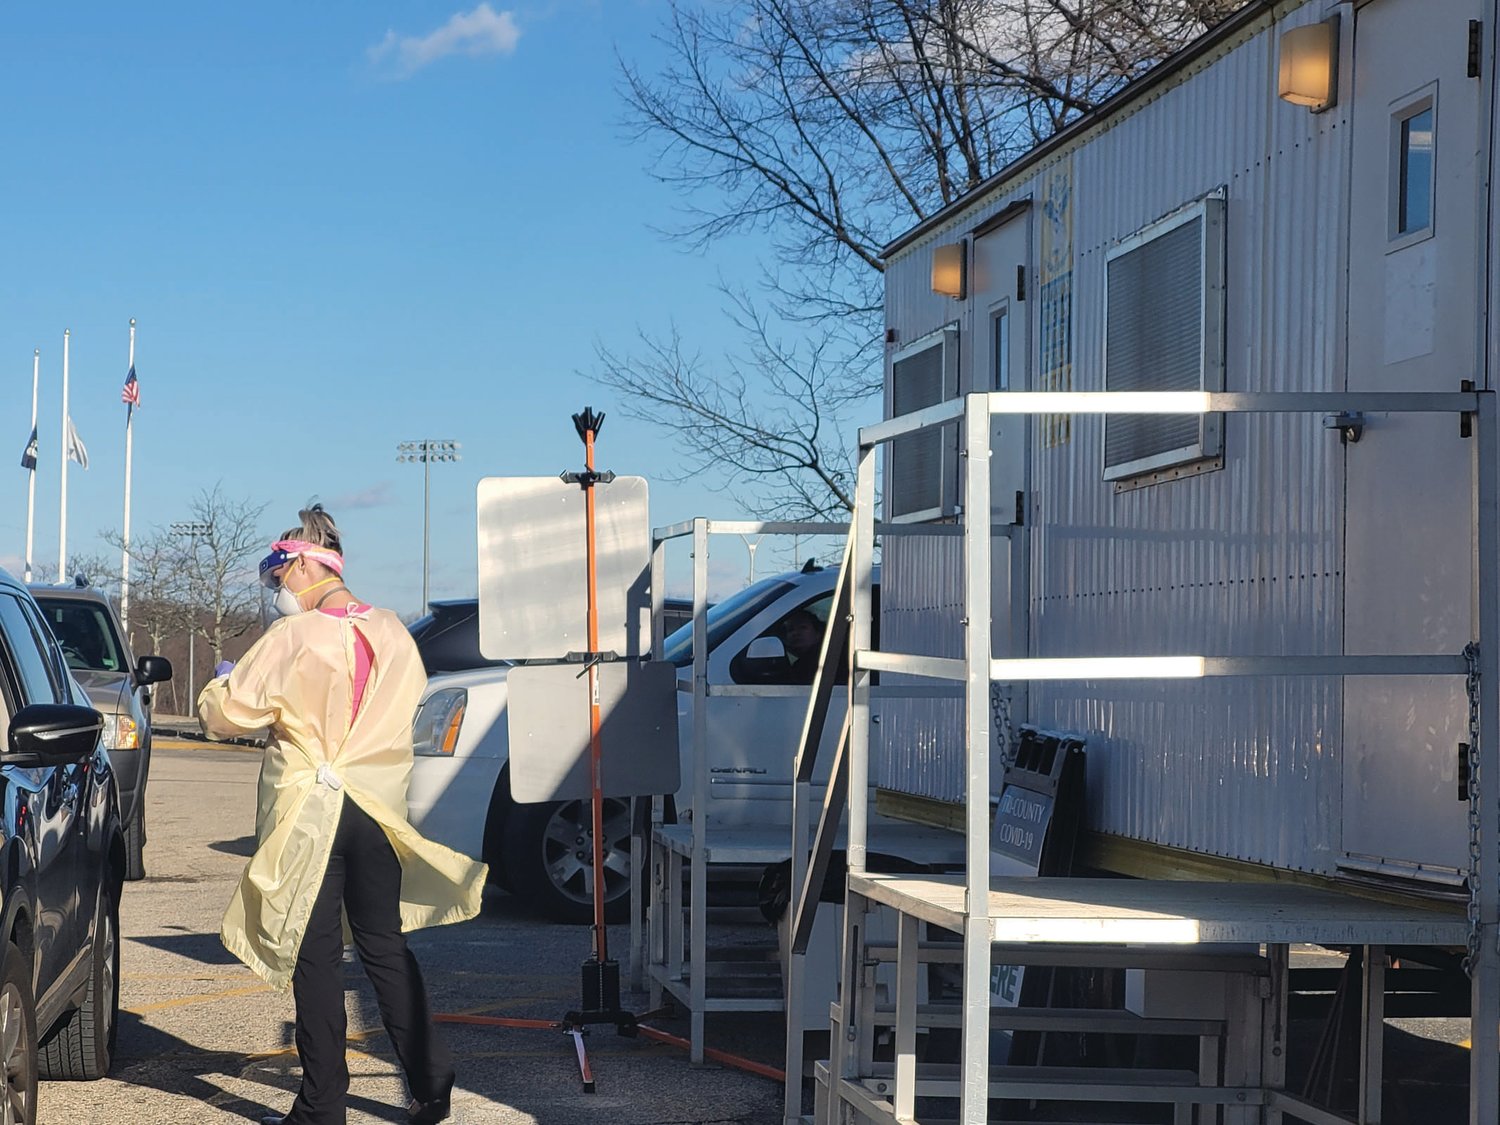 ULTIMATE TEST: Jessica Gormley, Practice Manager for Tri-County Community Action Agency, at right, gave Anthony Meleo, of Johnston, a PCR test for COVID-19 from the free testing trailer stationed in the Johnston High Parking lot.